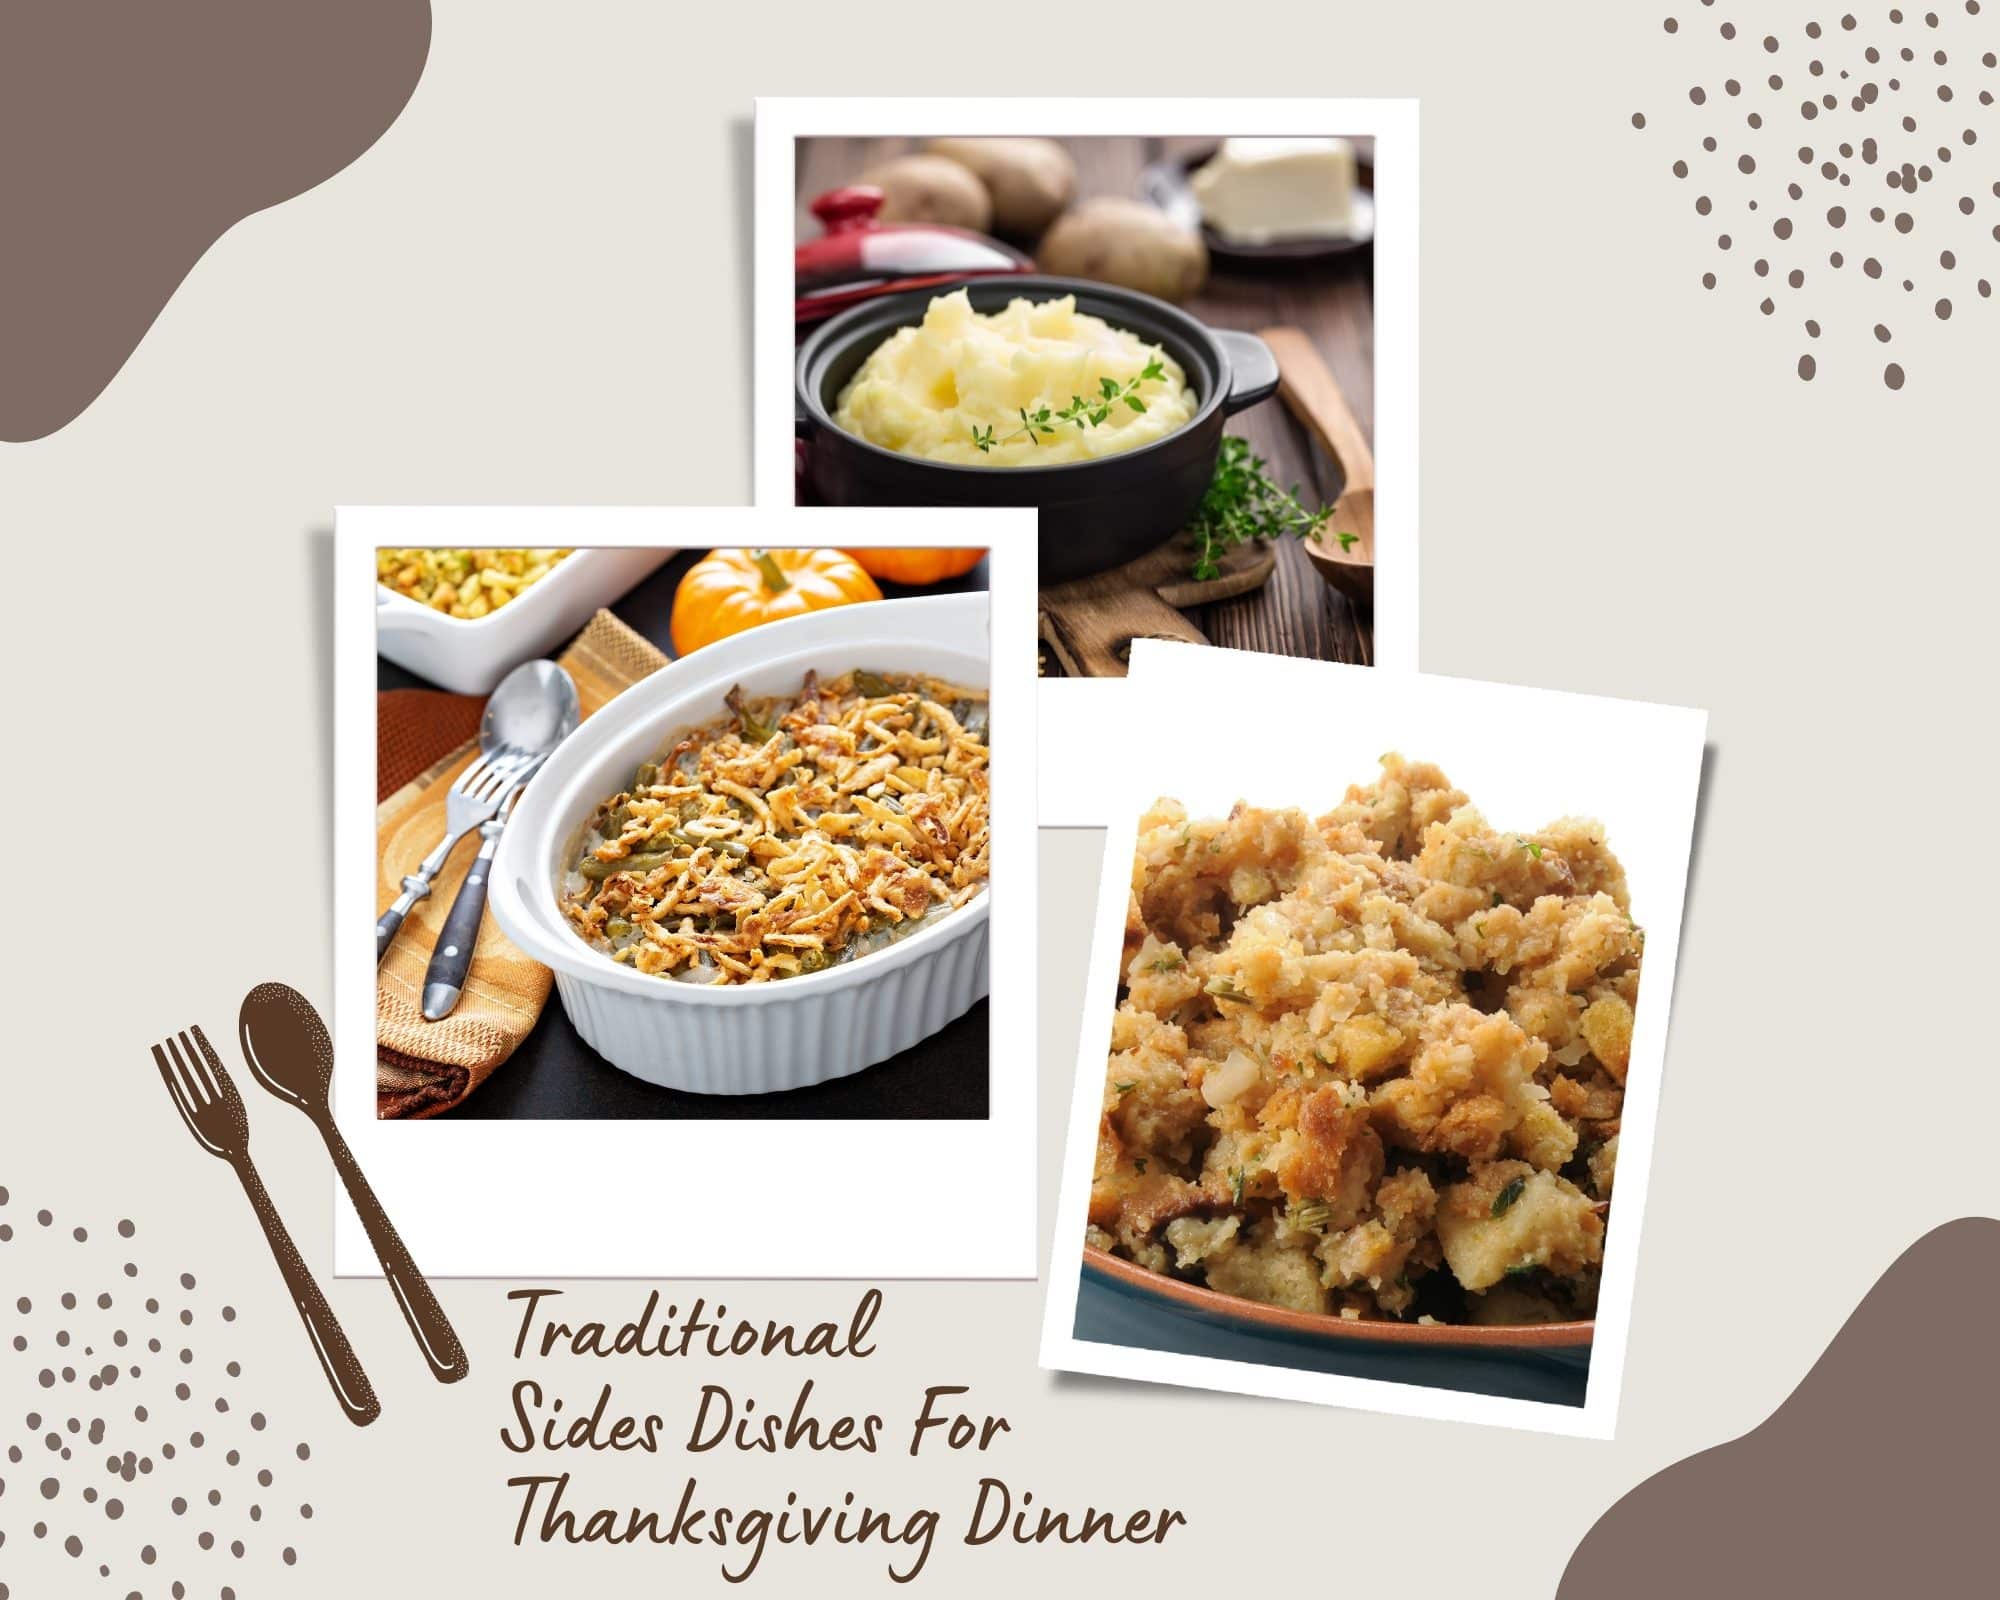 Traditional Thanksgiving Dinner Side Dishes